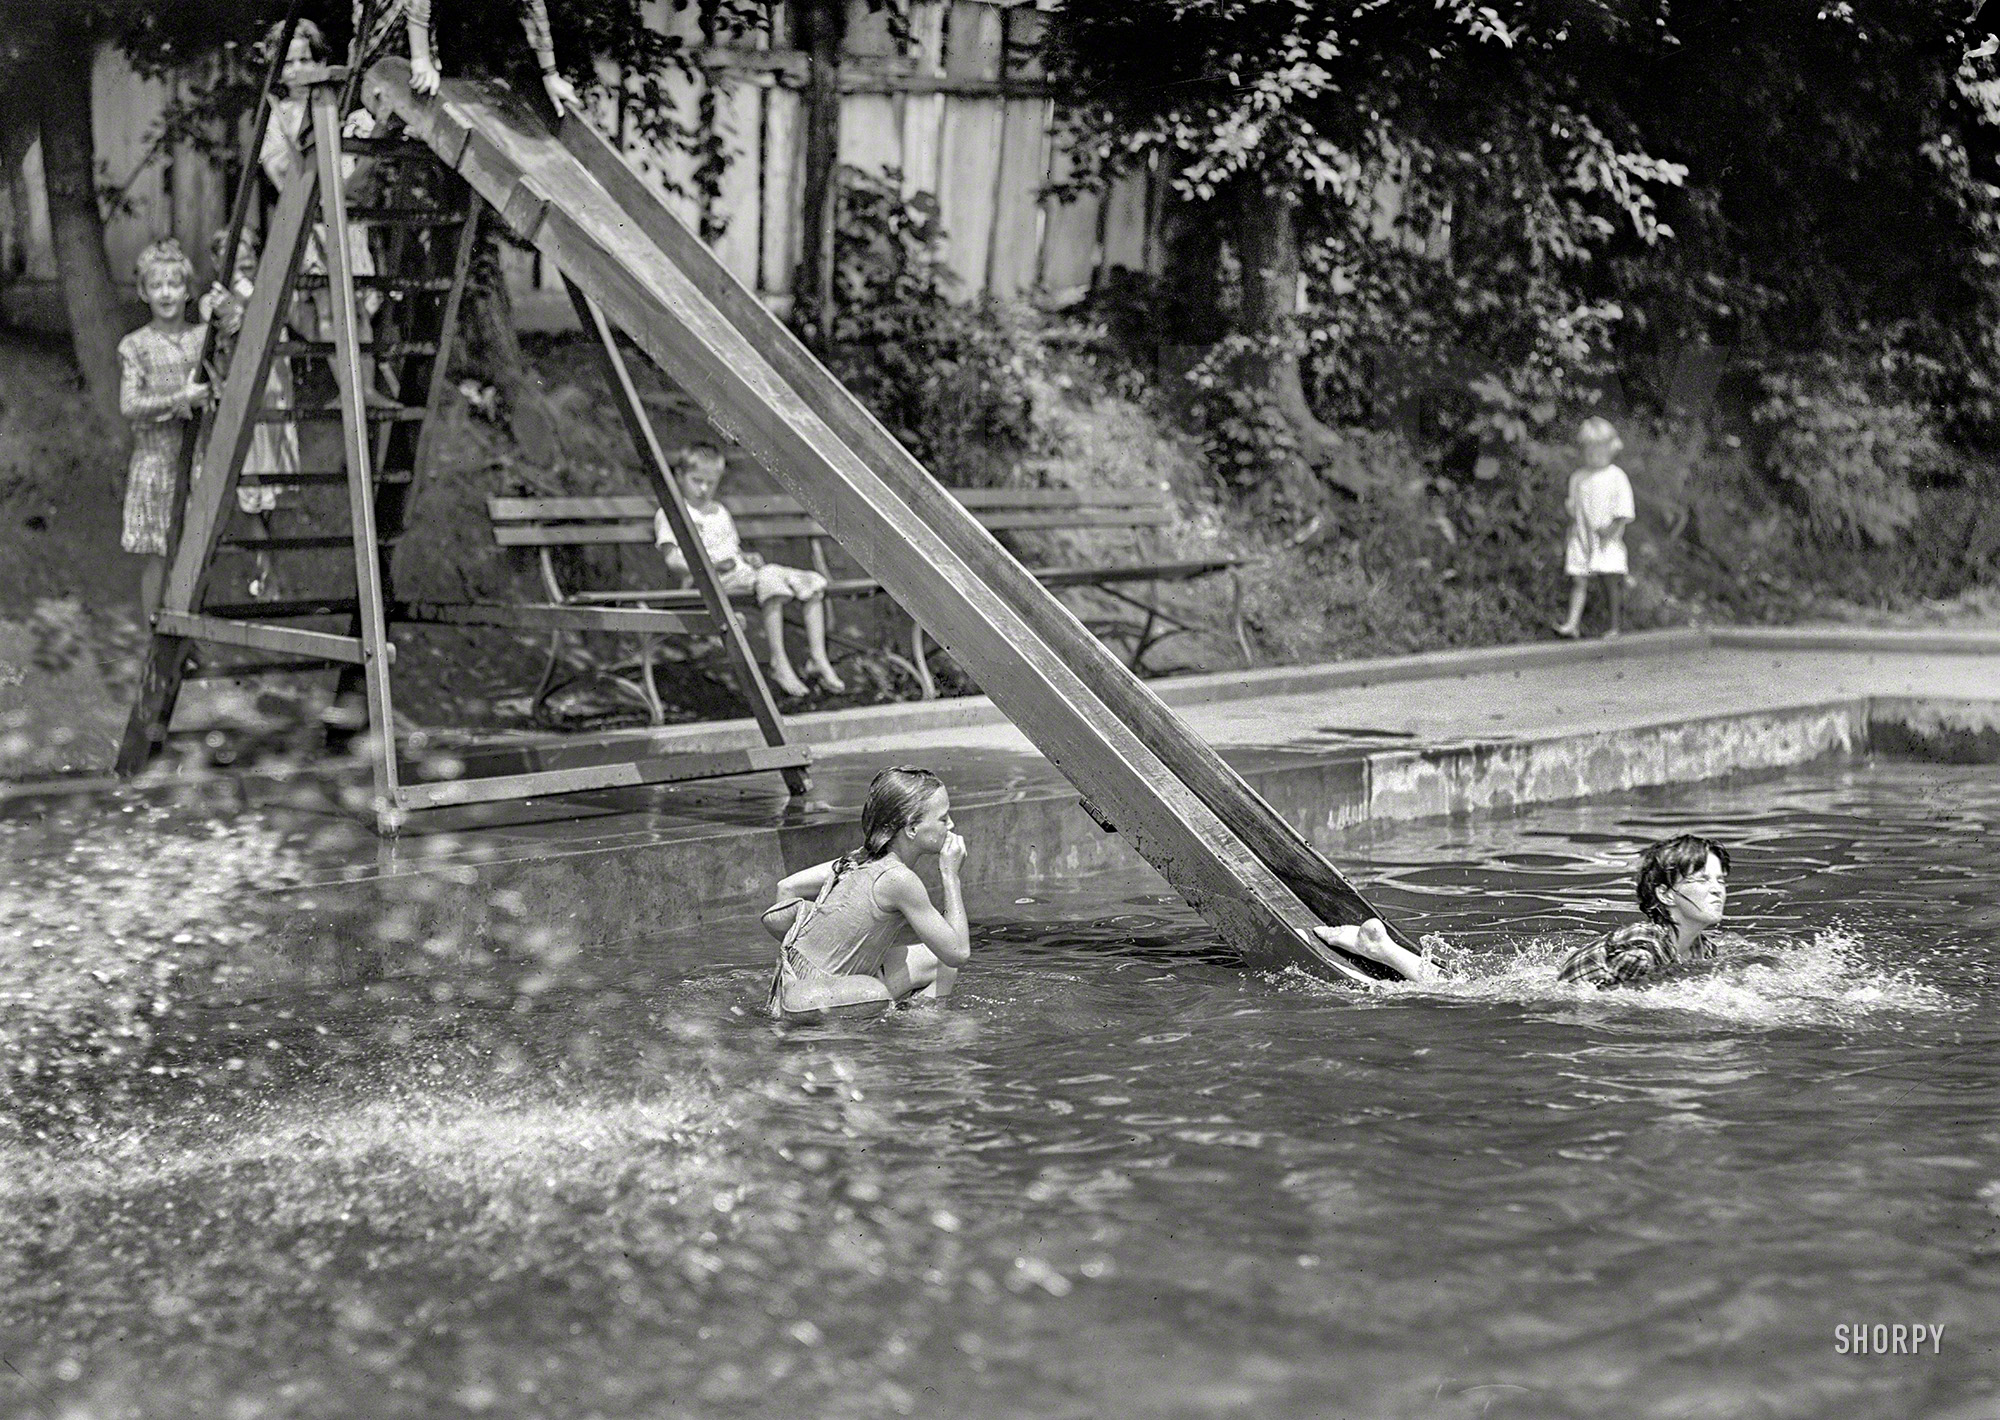 Washington, D.C., 1912. "District of Columbia parks -- children at fountains and pools." Harris & Ewing Collection glass negative. View full size.